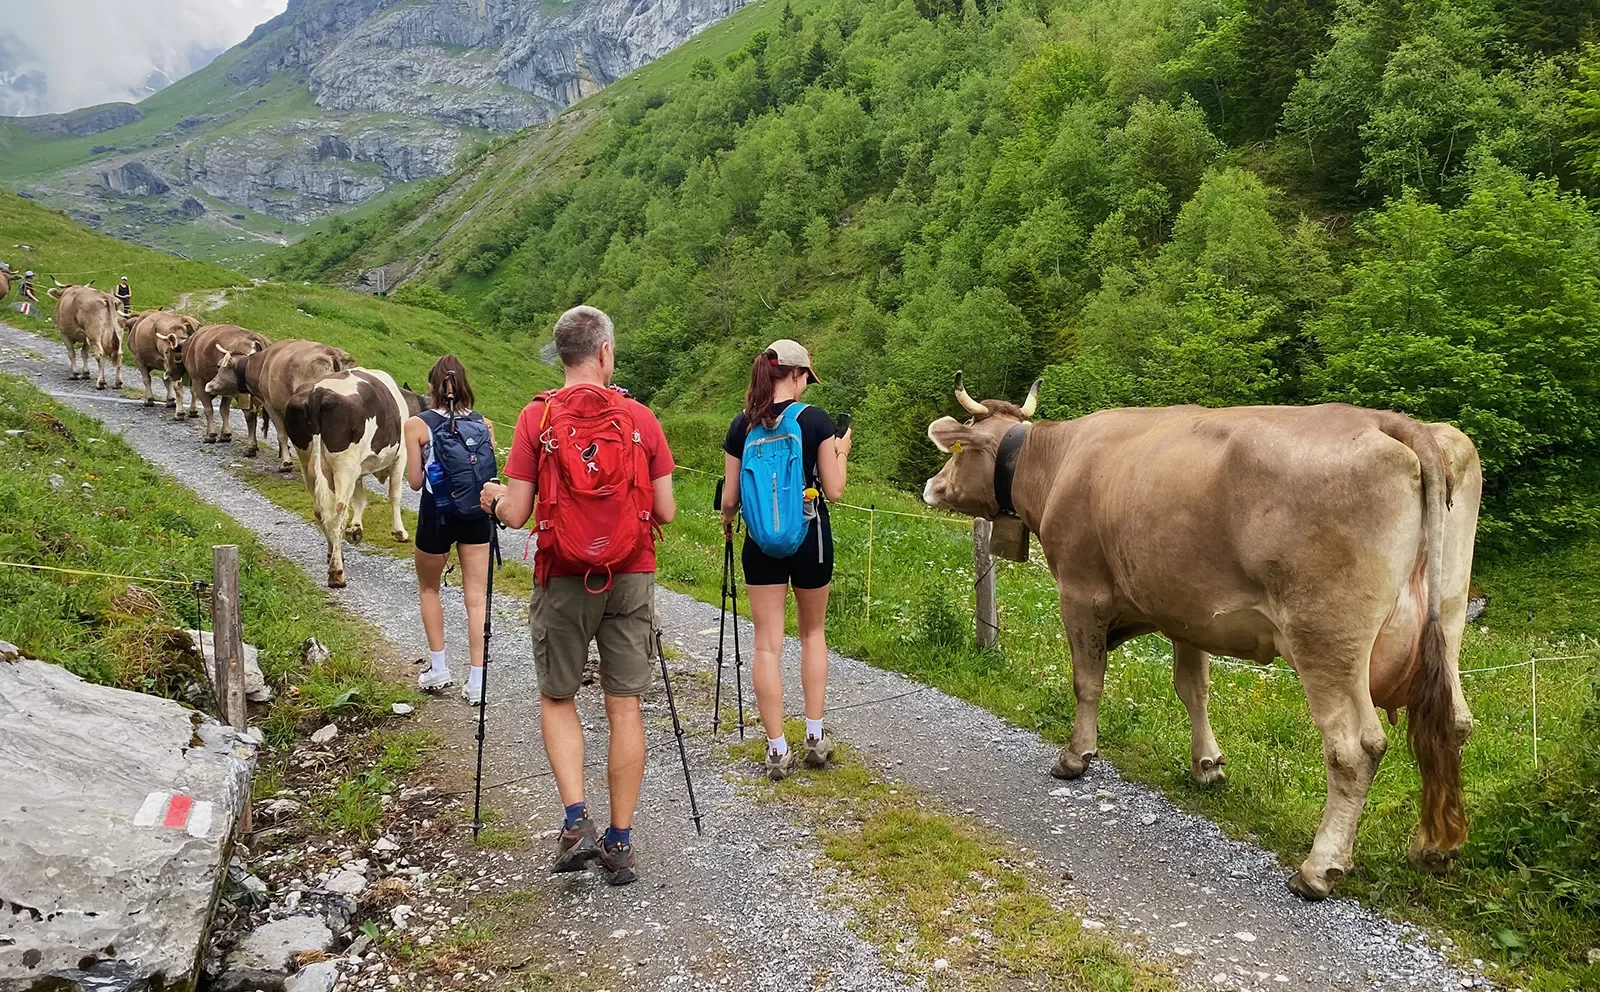 Three guests on trail, large line of cows in front of them.